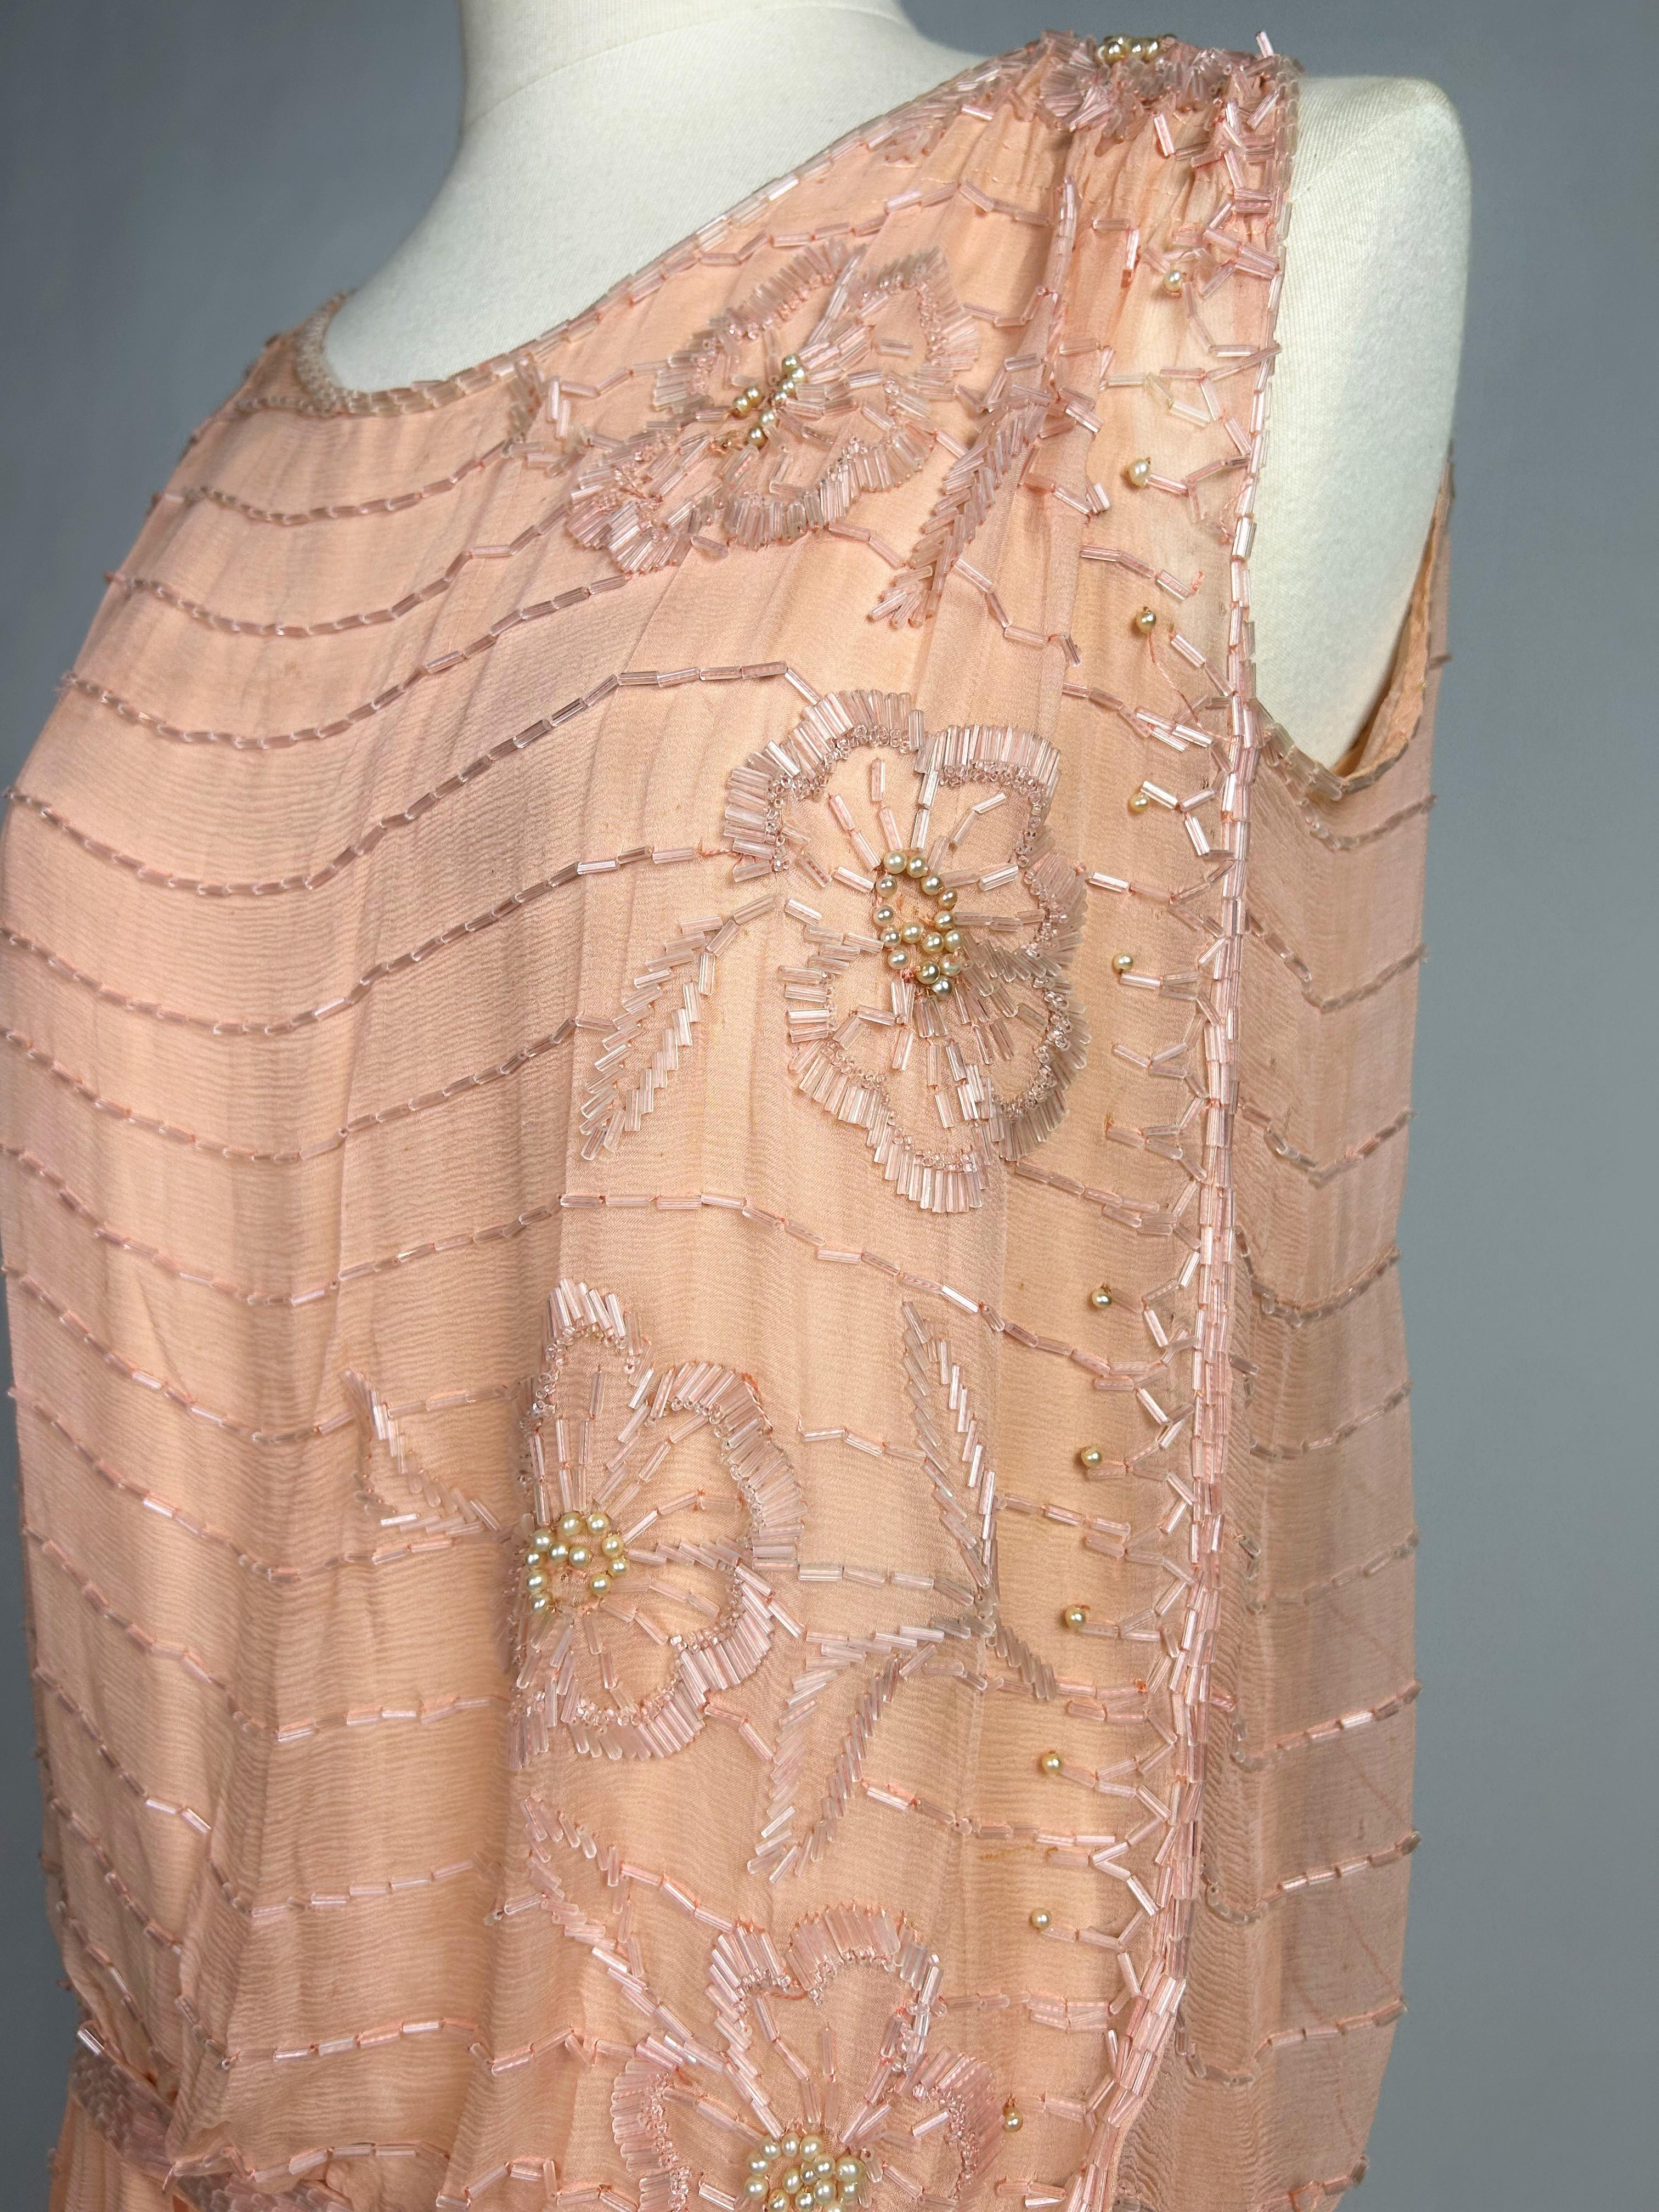 A Salmon embroidered Chiffon Flapper Dress - France Circa 1925 For Sale 5